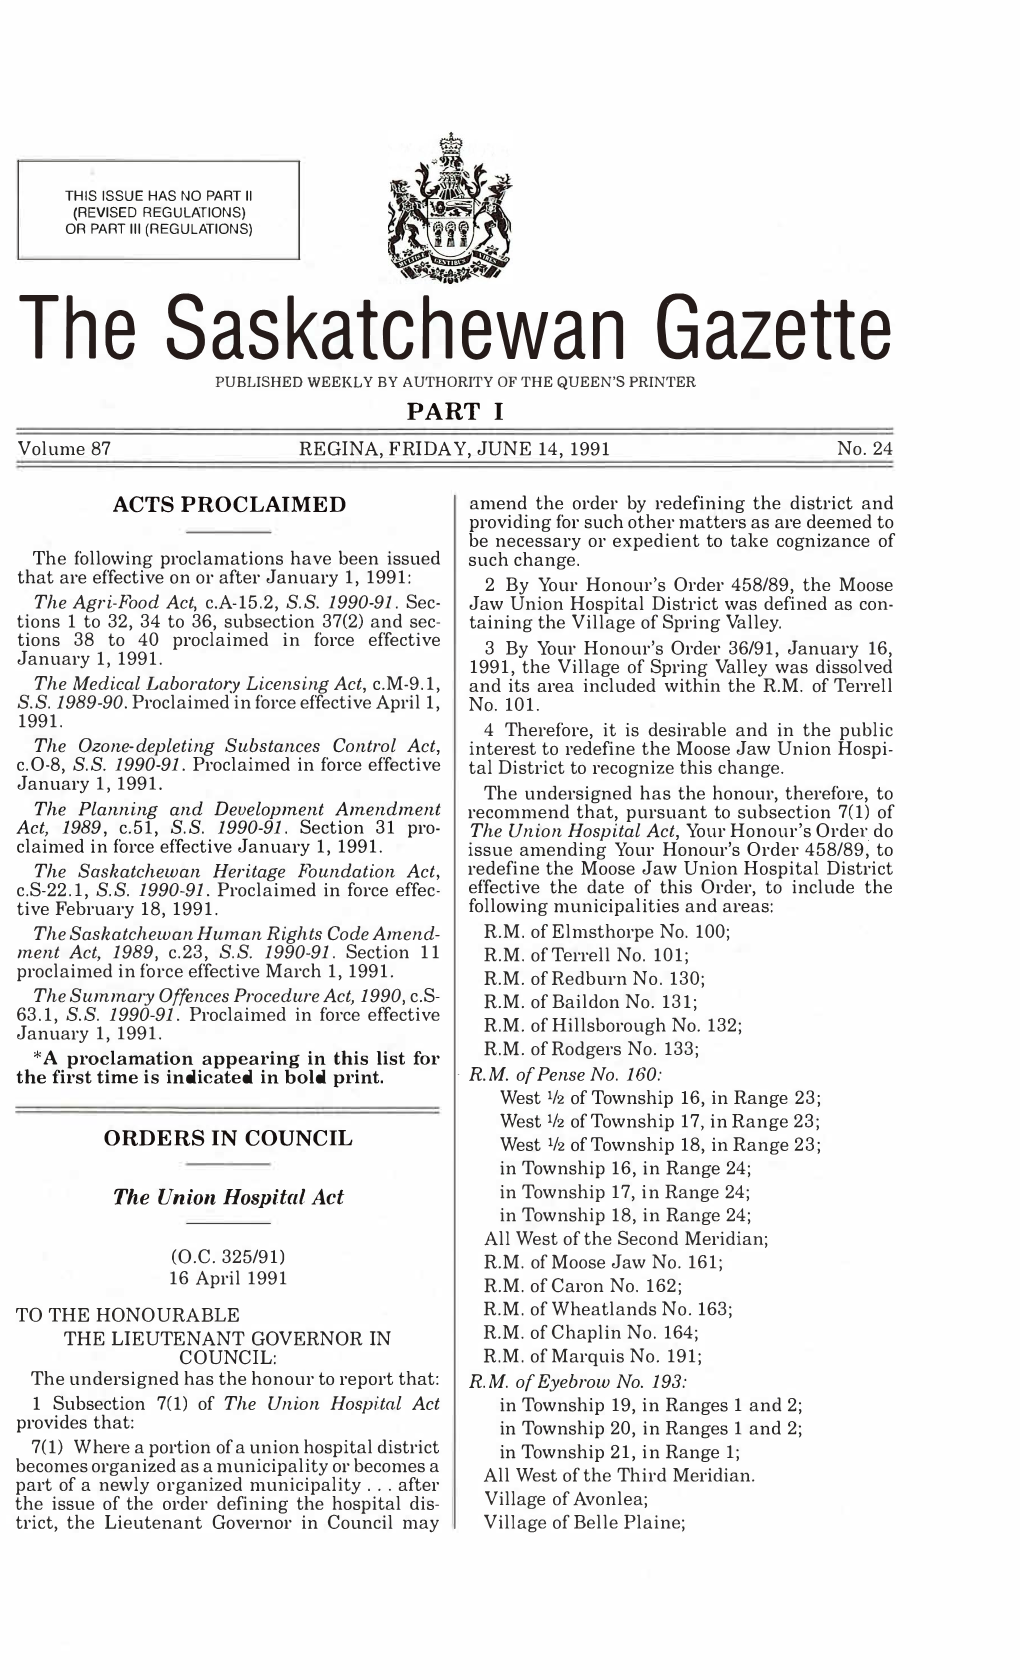 The Saskatchewan Gazette PUBLISHED WEEKLY by AUTHORITY of the QUEEN's PRINTER PART I Volume 87 REGINA, FRIDAY , JUNE 14, 1991 No